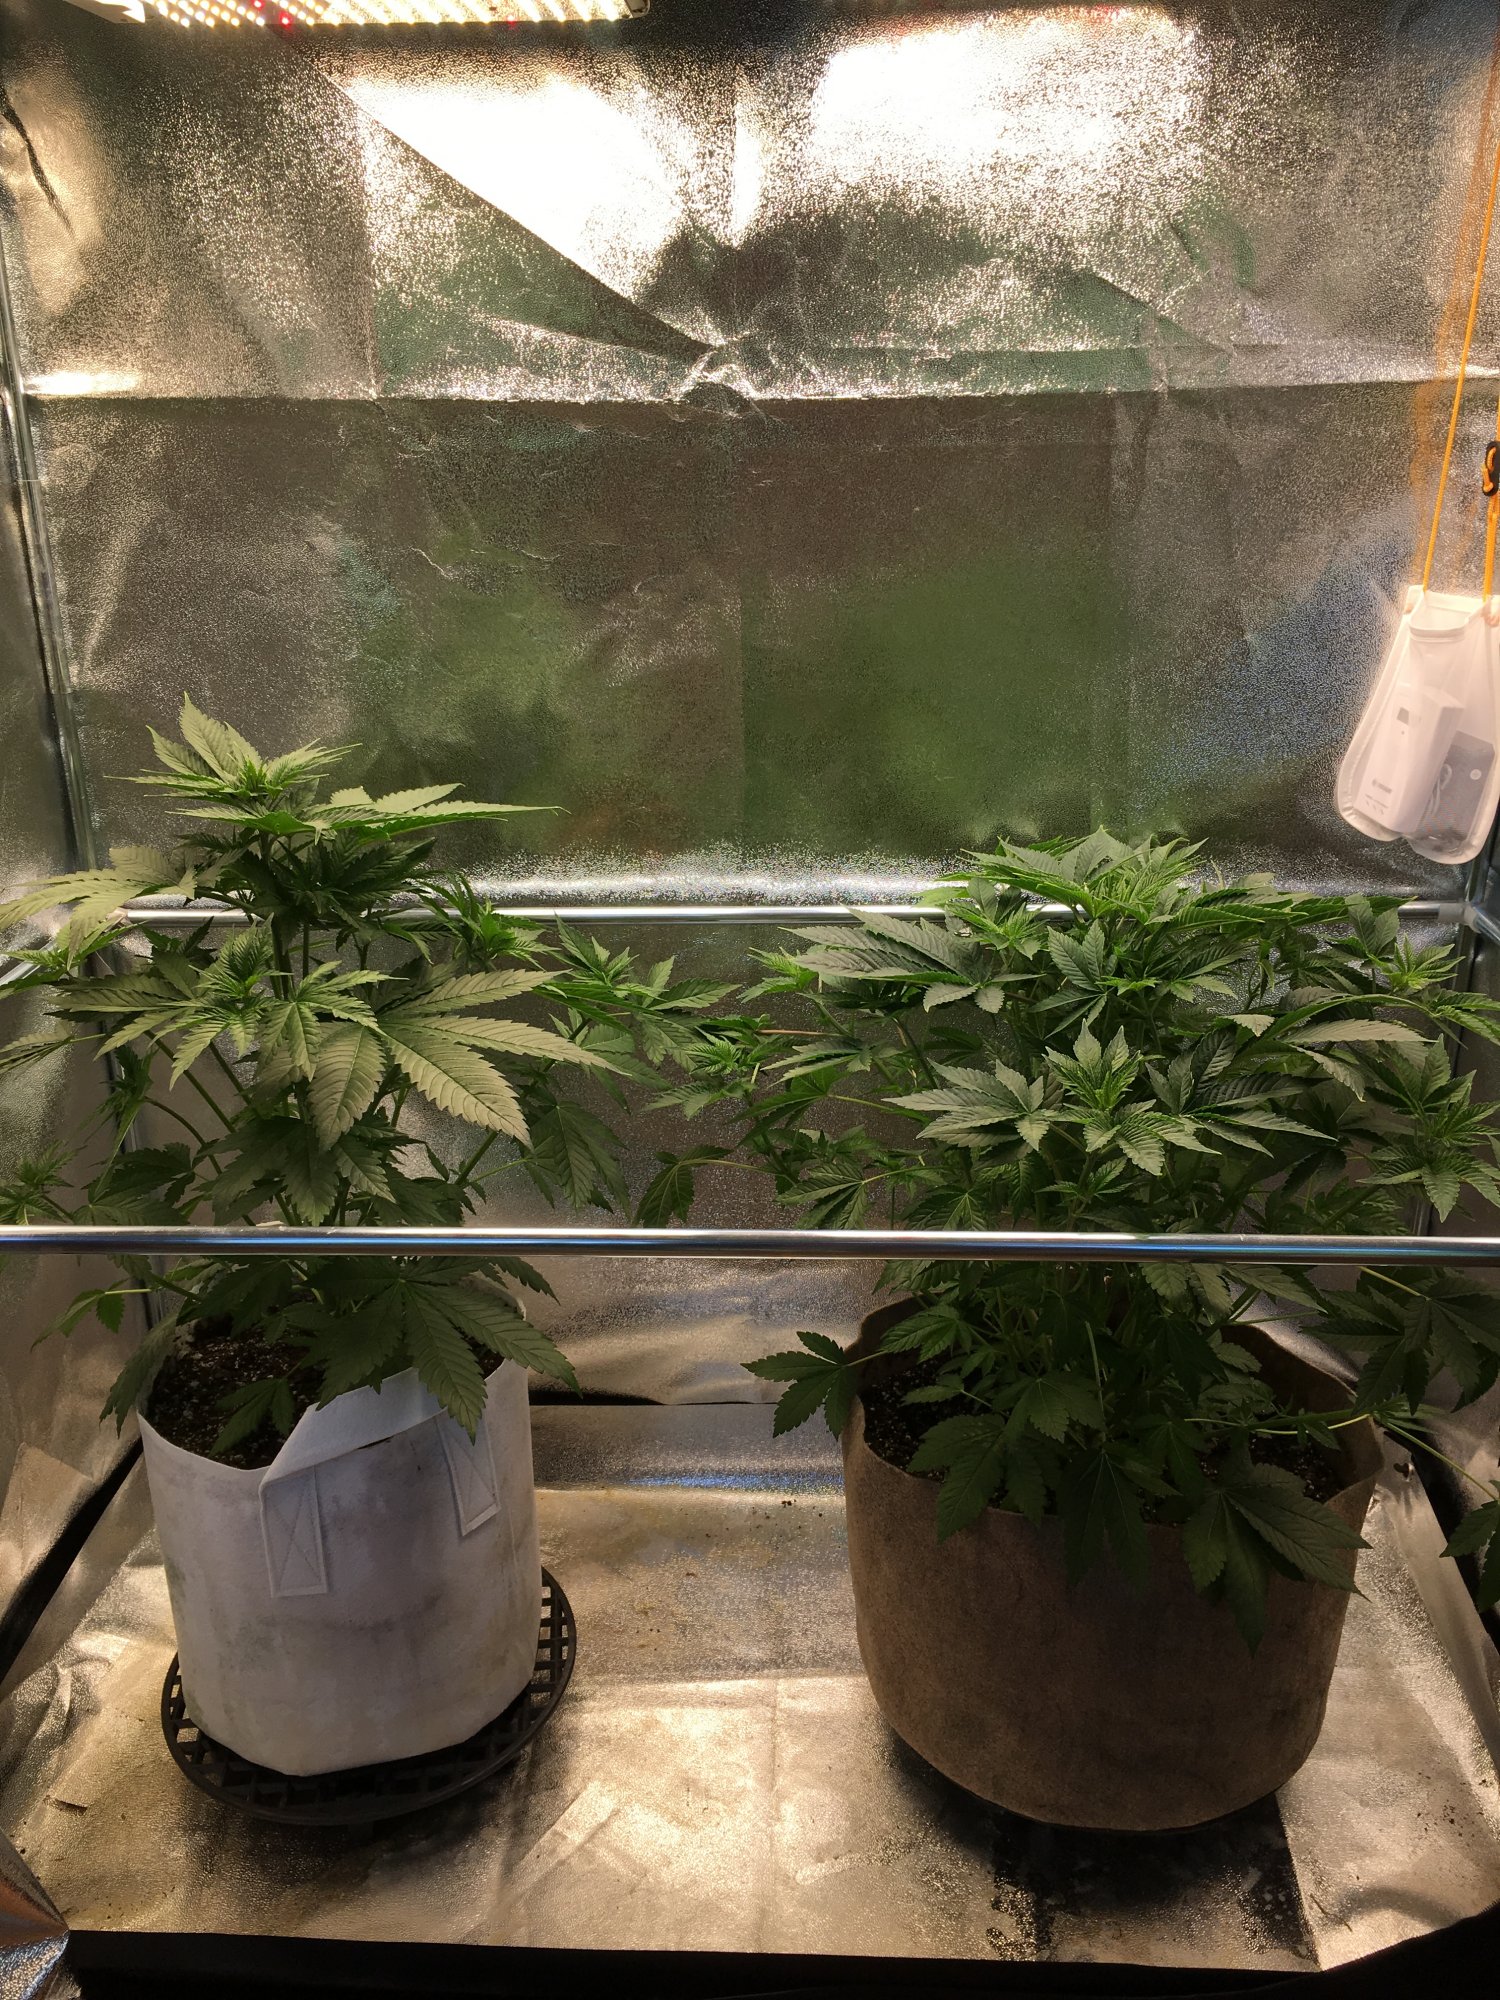 Plants getting too tall at only 4 5 weeks